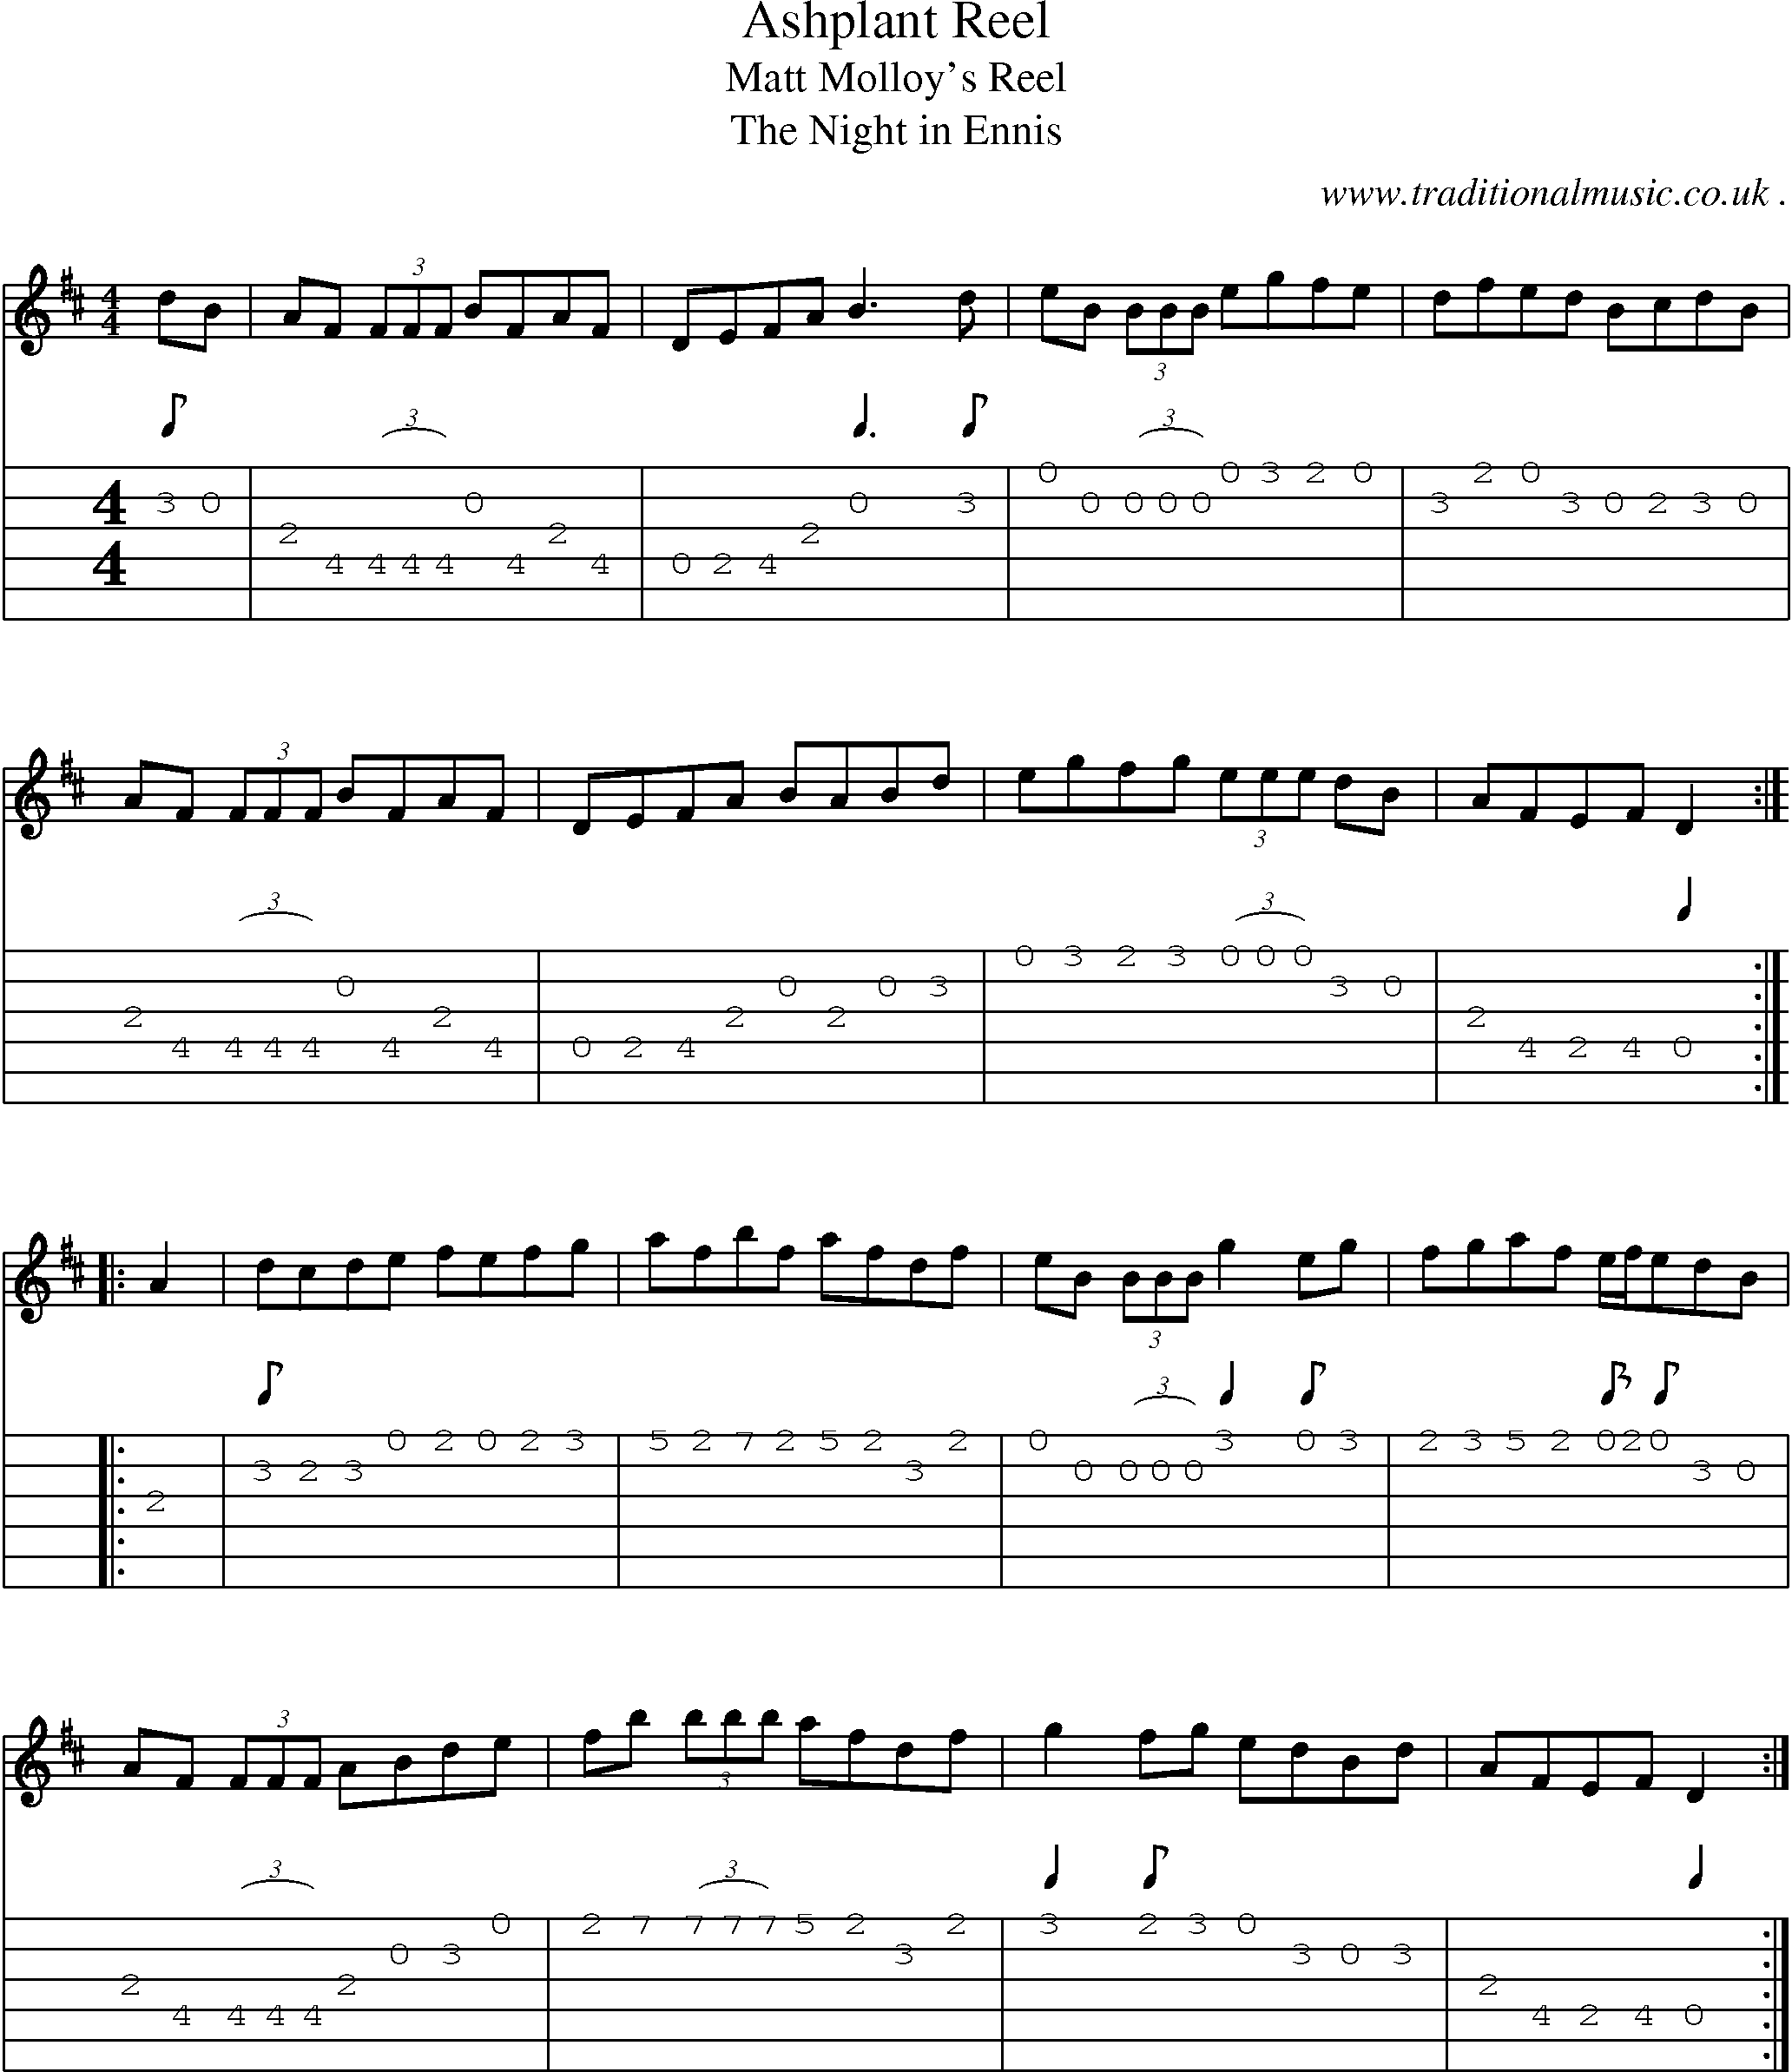 Sheet-Music and Guitar Tabs for Ashplant Reel